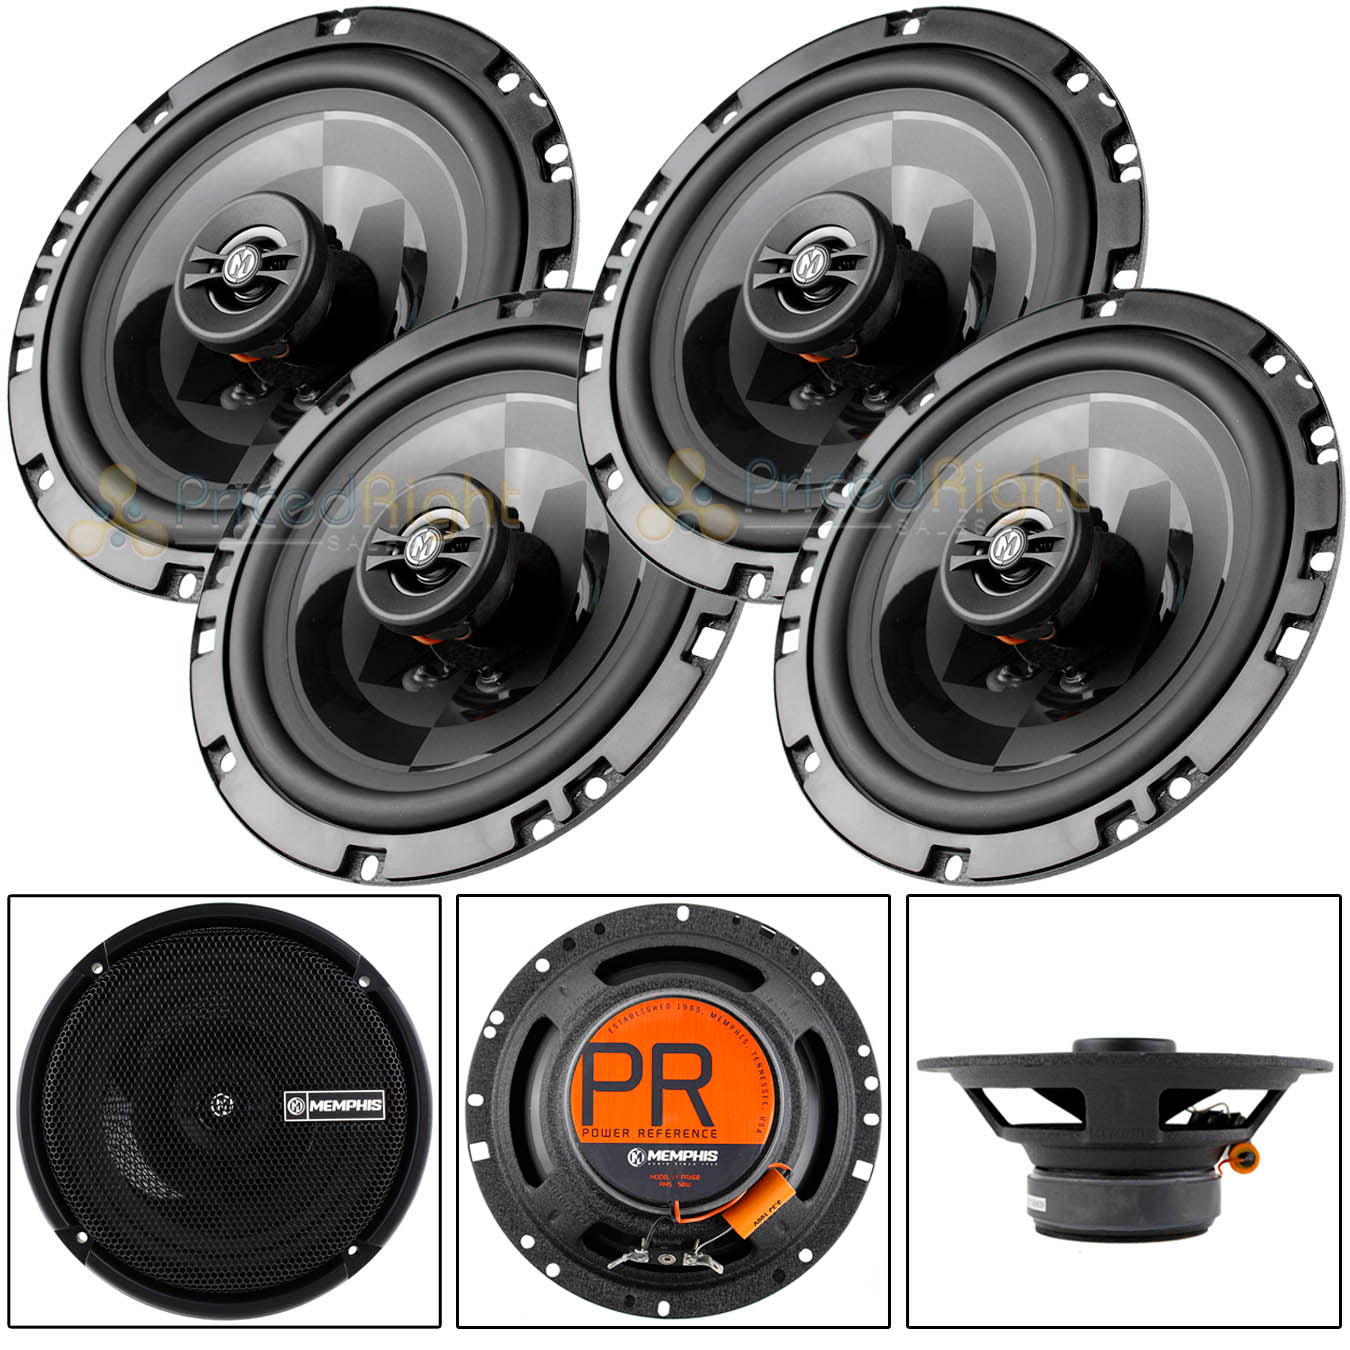 4 Memphis Audio 6.5" Oversized Coaxial Speakers 100W Max Power Reference 2 Pair